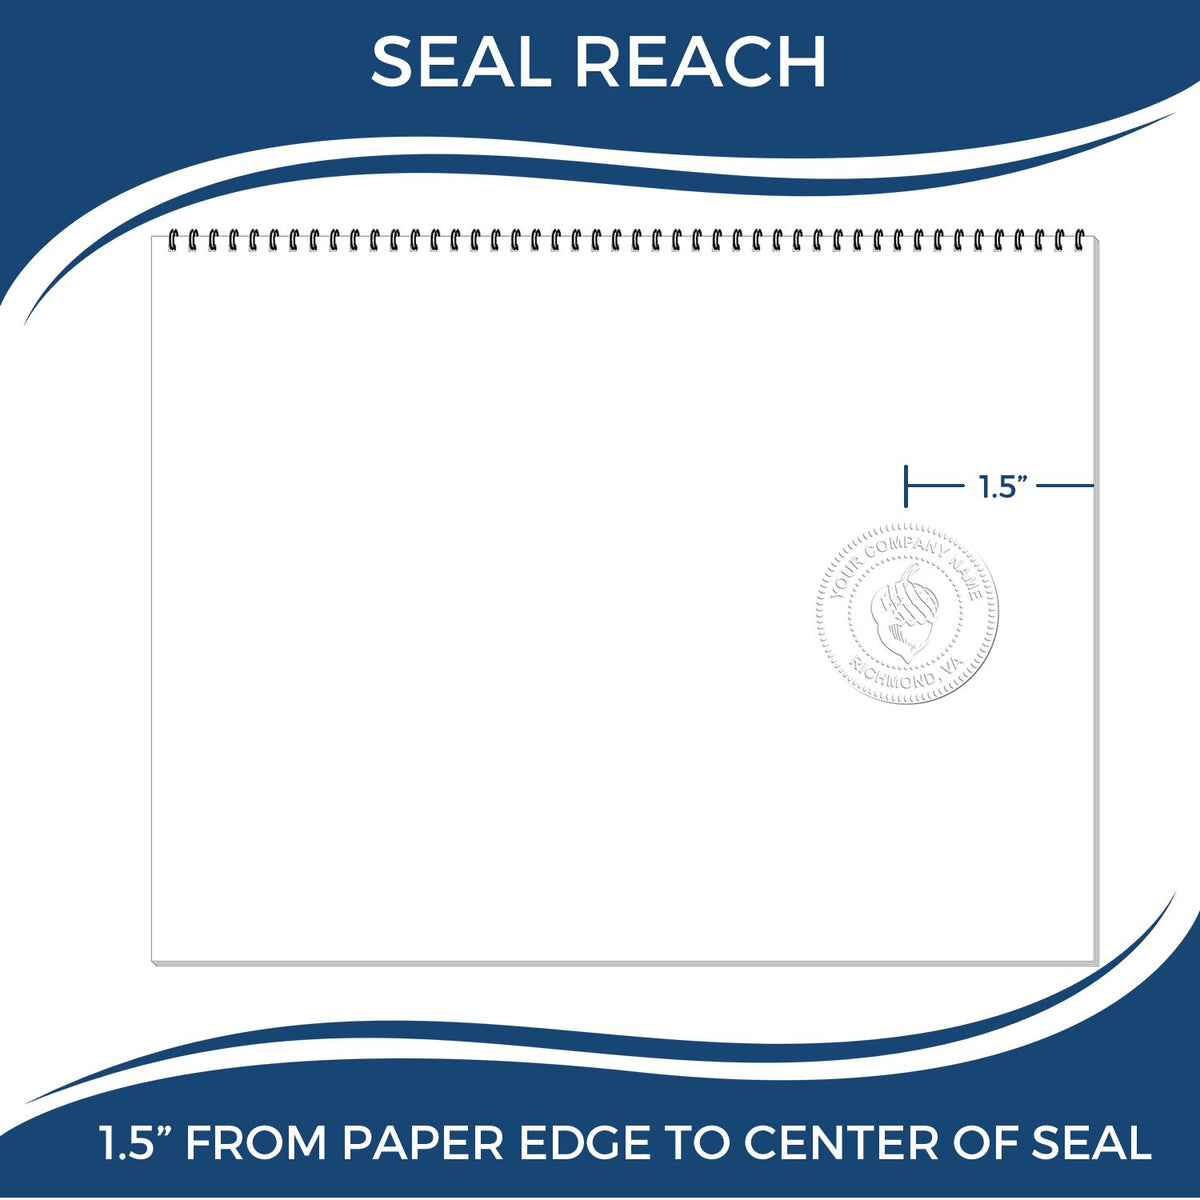 An infographic showing the seal reach which is represented by a ruler and a miniature seal image of the Hybrid Massachusetts Land Surveyor Seal